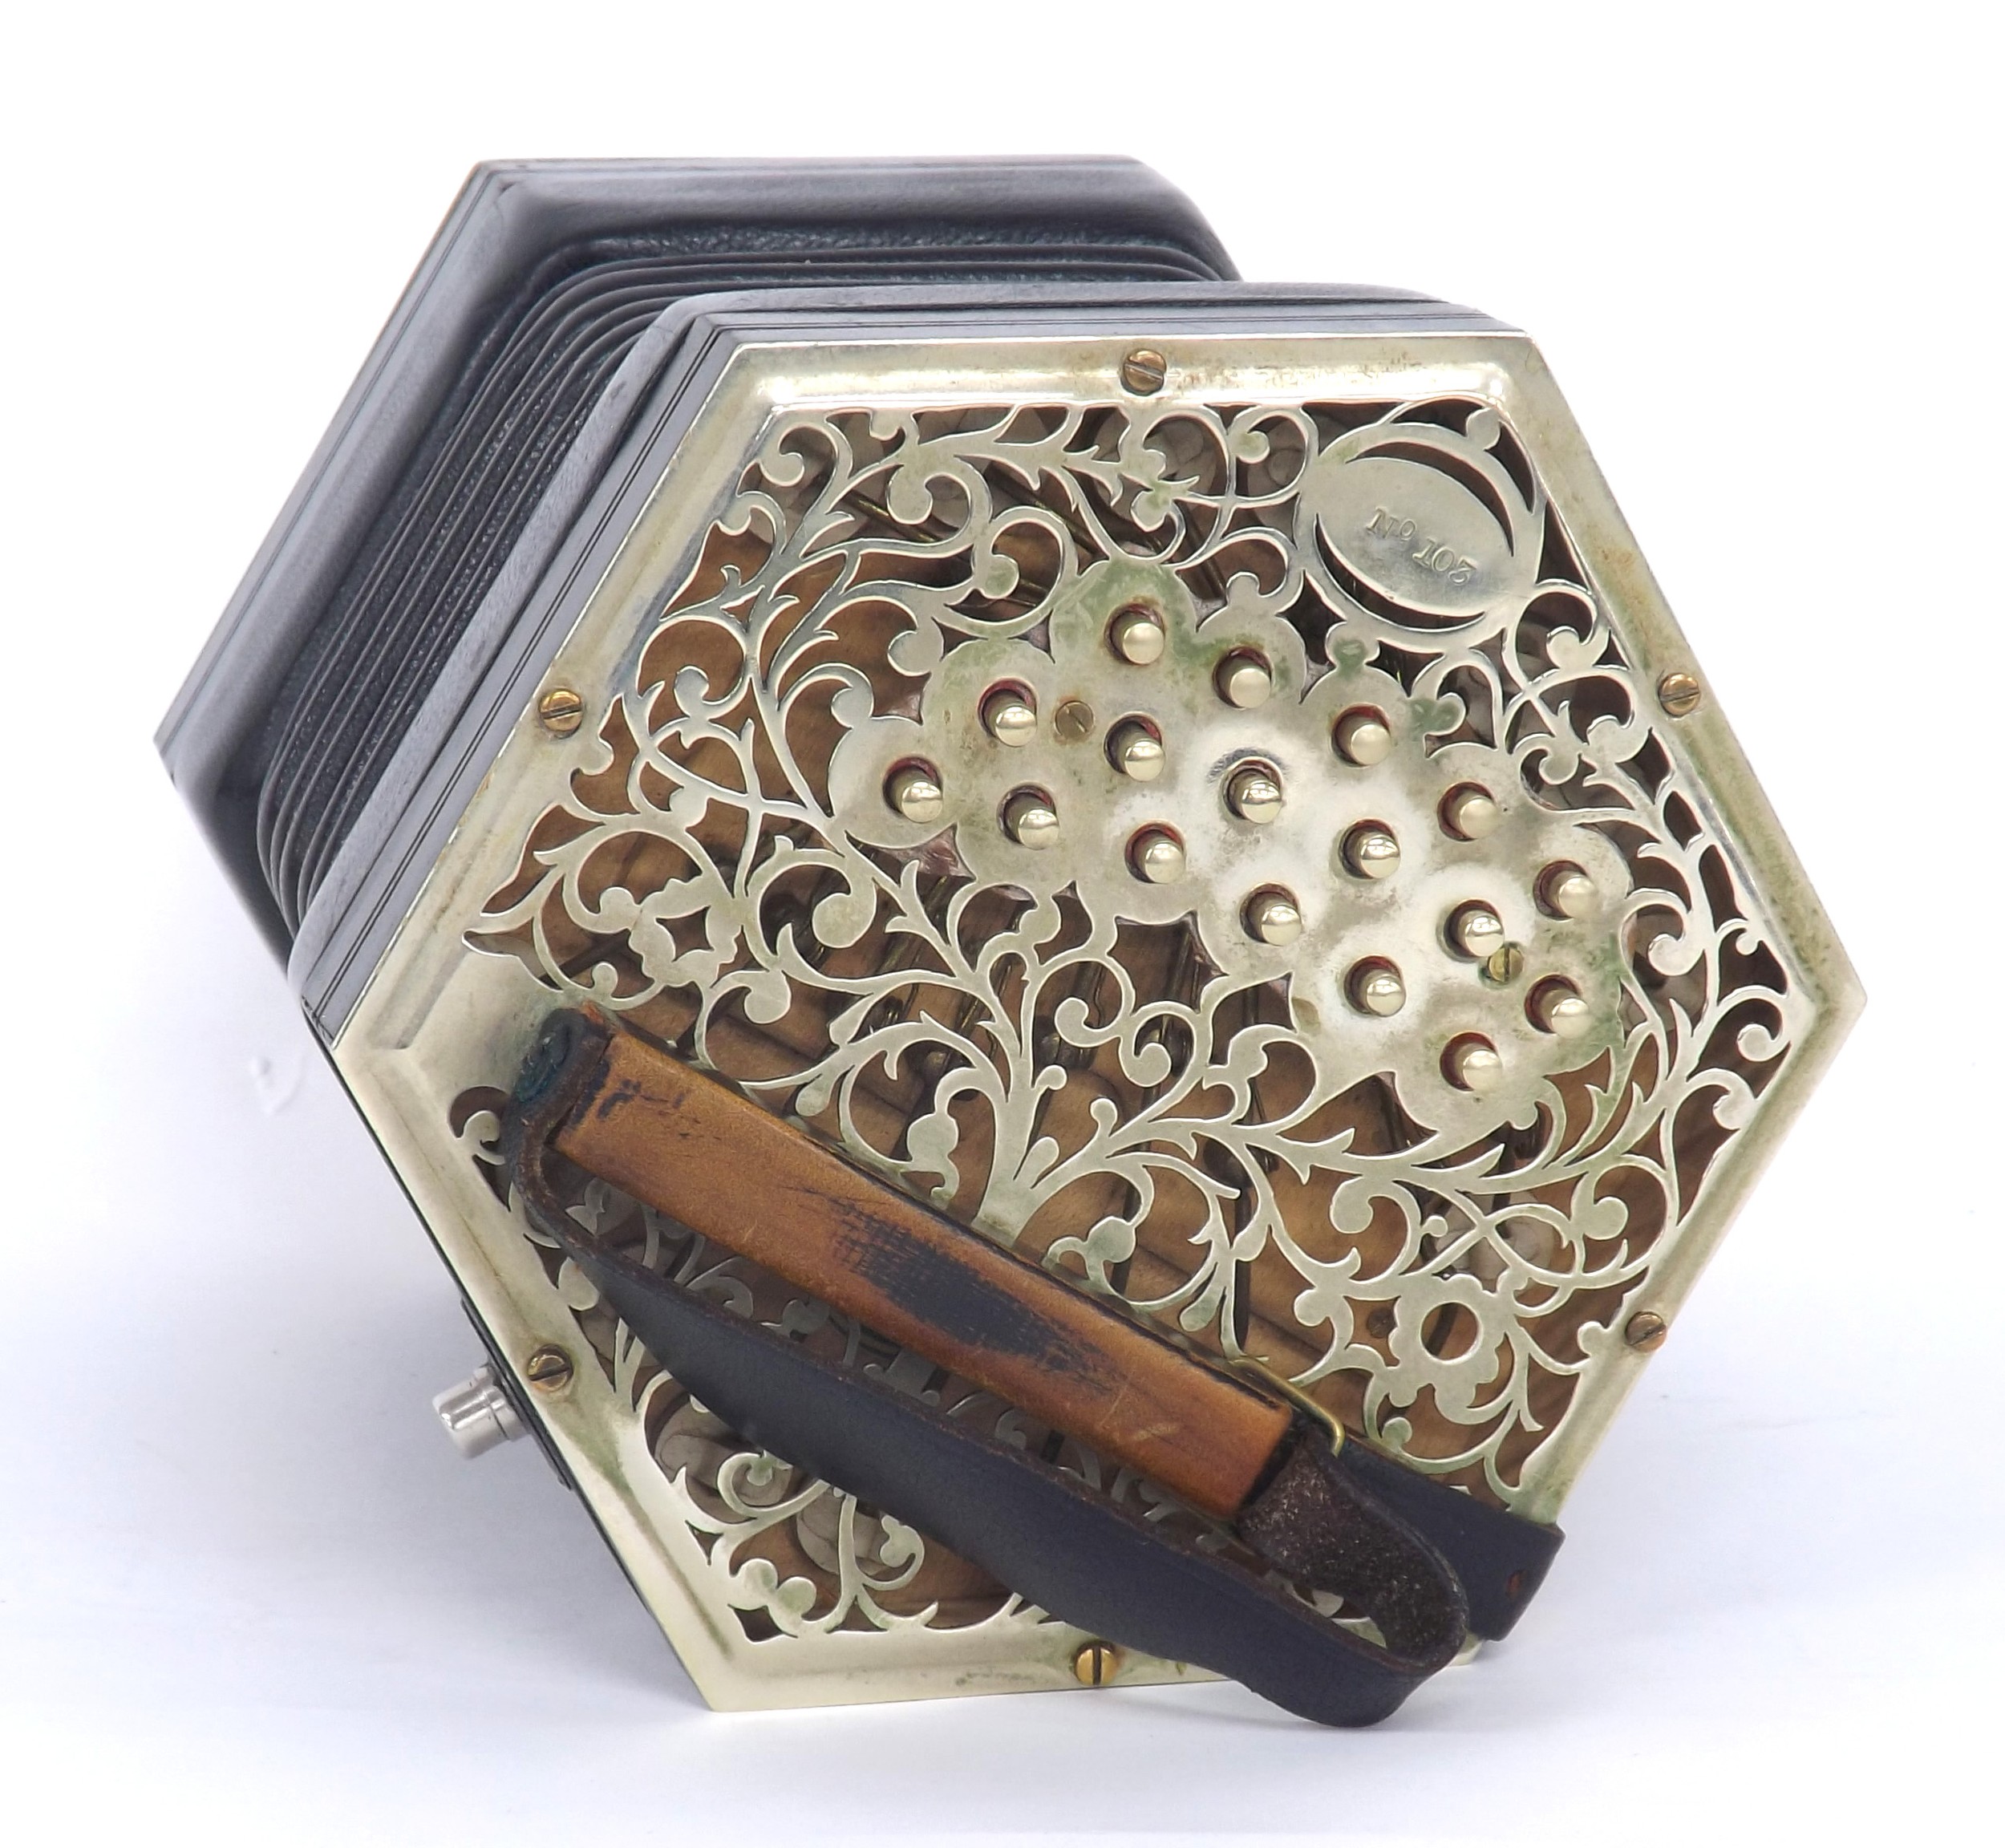 Fine Anglo concertina by and labelled Colin Dipper, no. 103, with thirty-four metal buttons on - Image 3 of 6